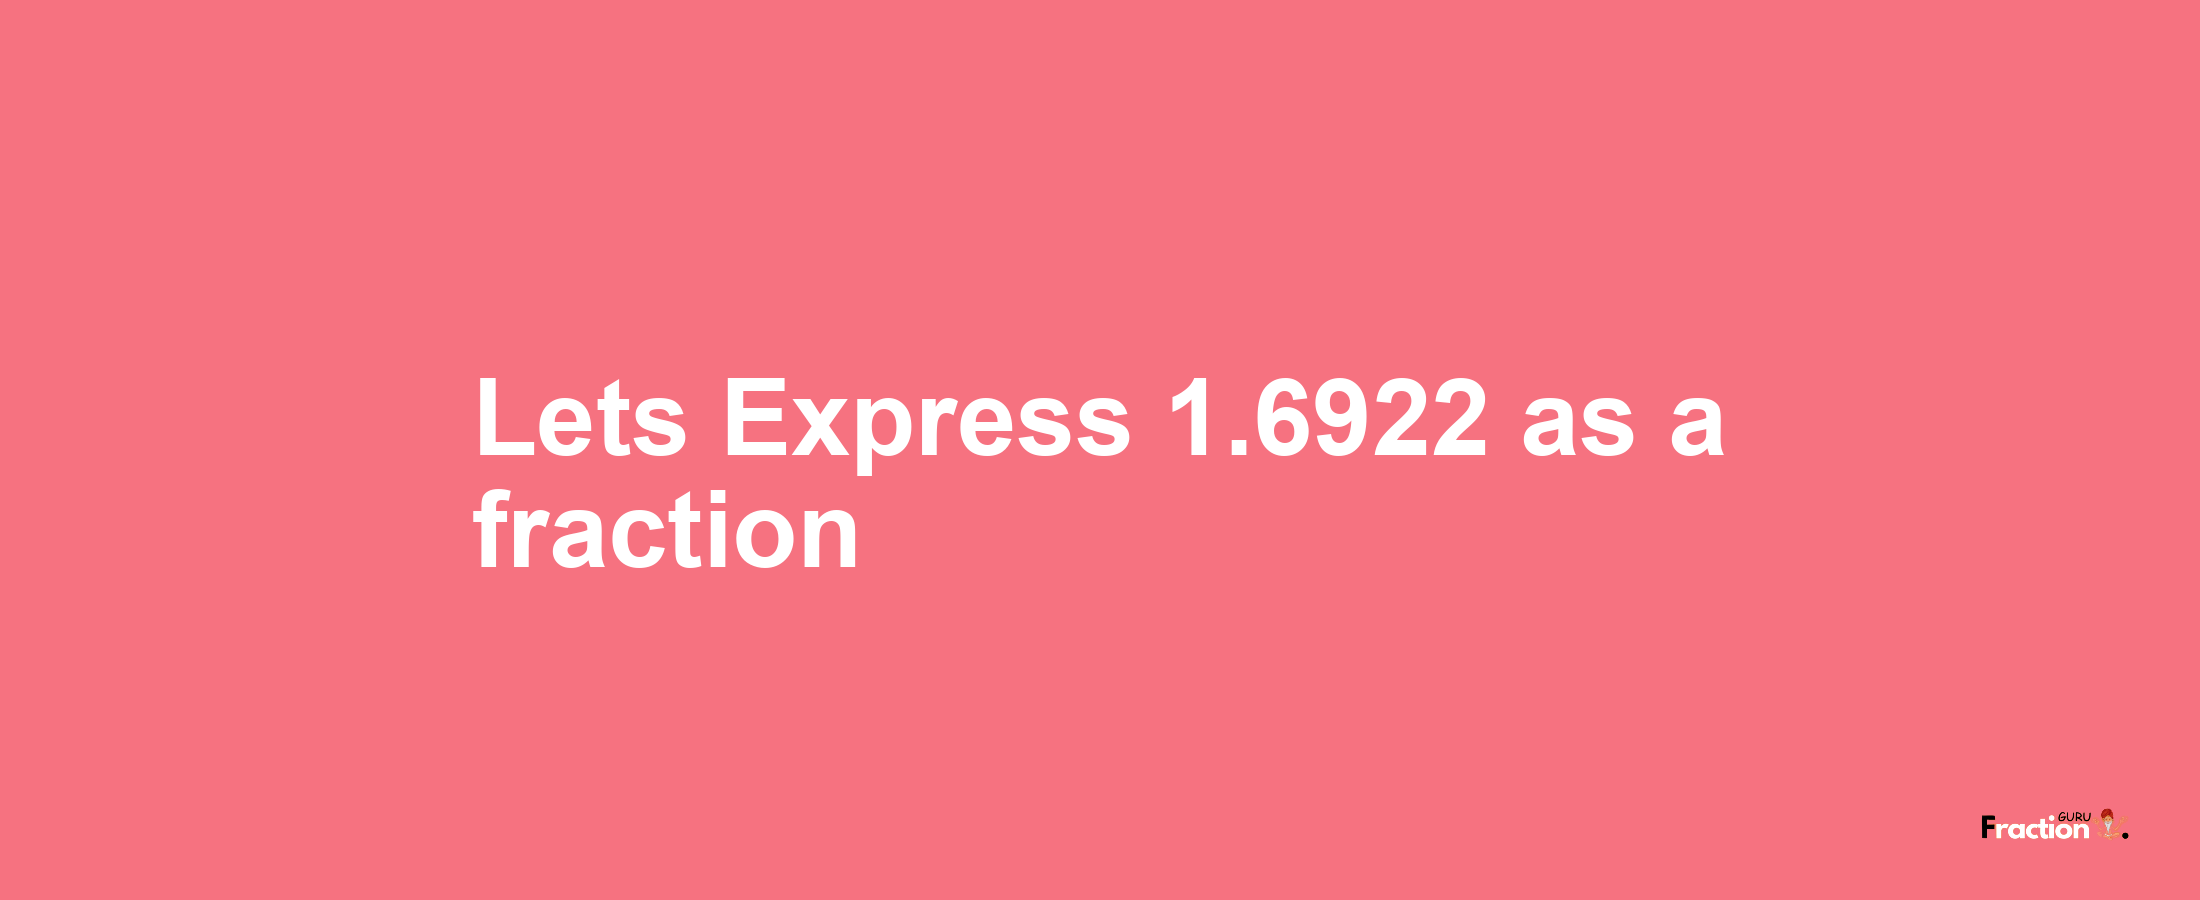 Lets Express 1.6922 as afraction